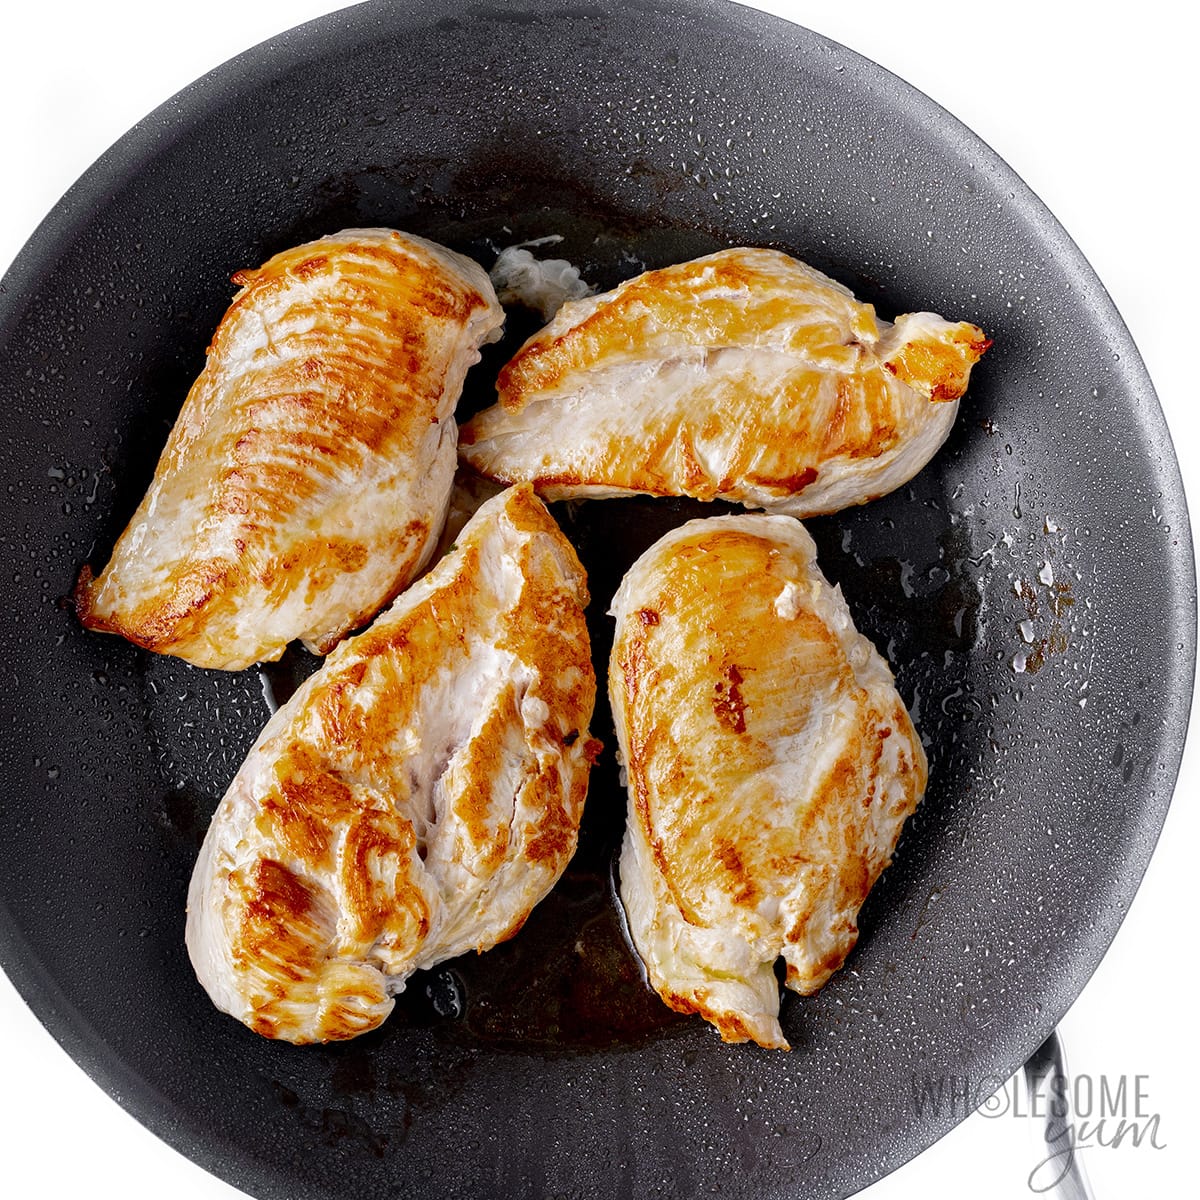 Chicken seared in a skillet.